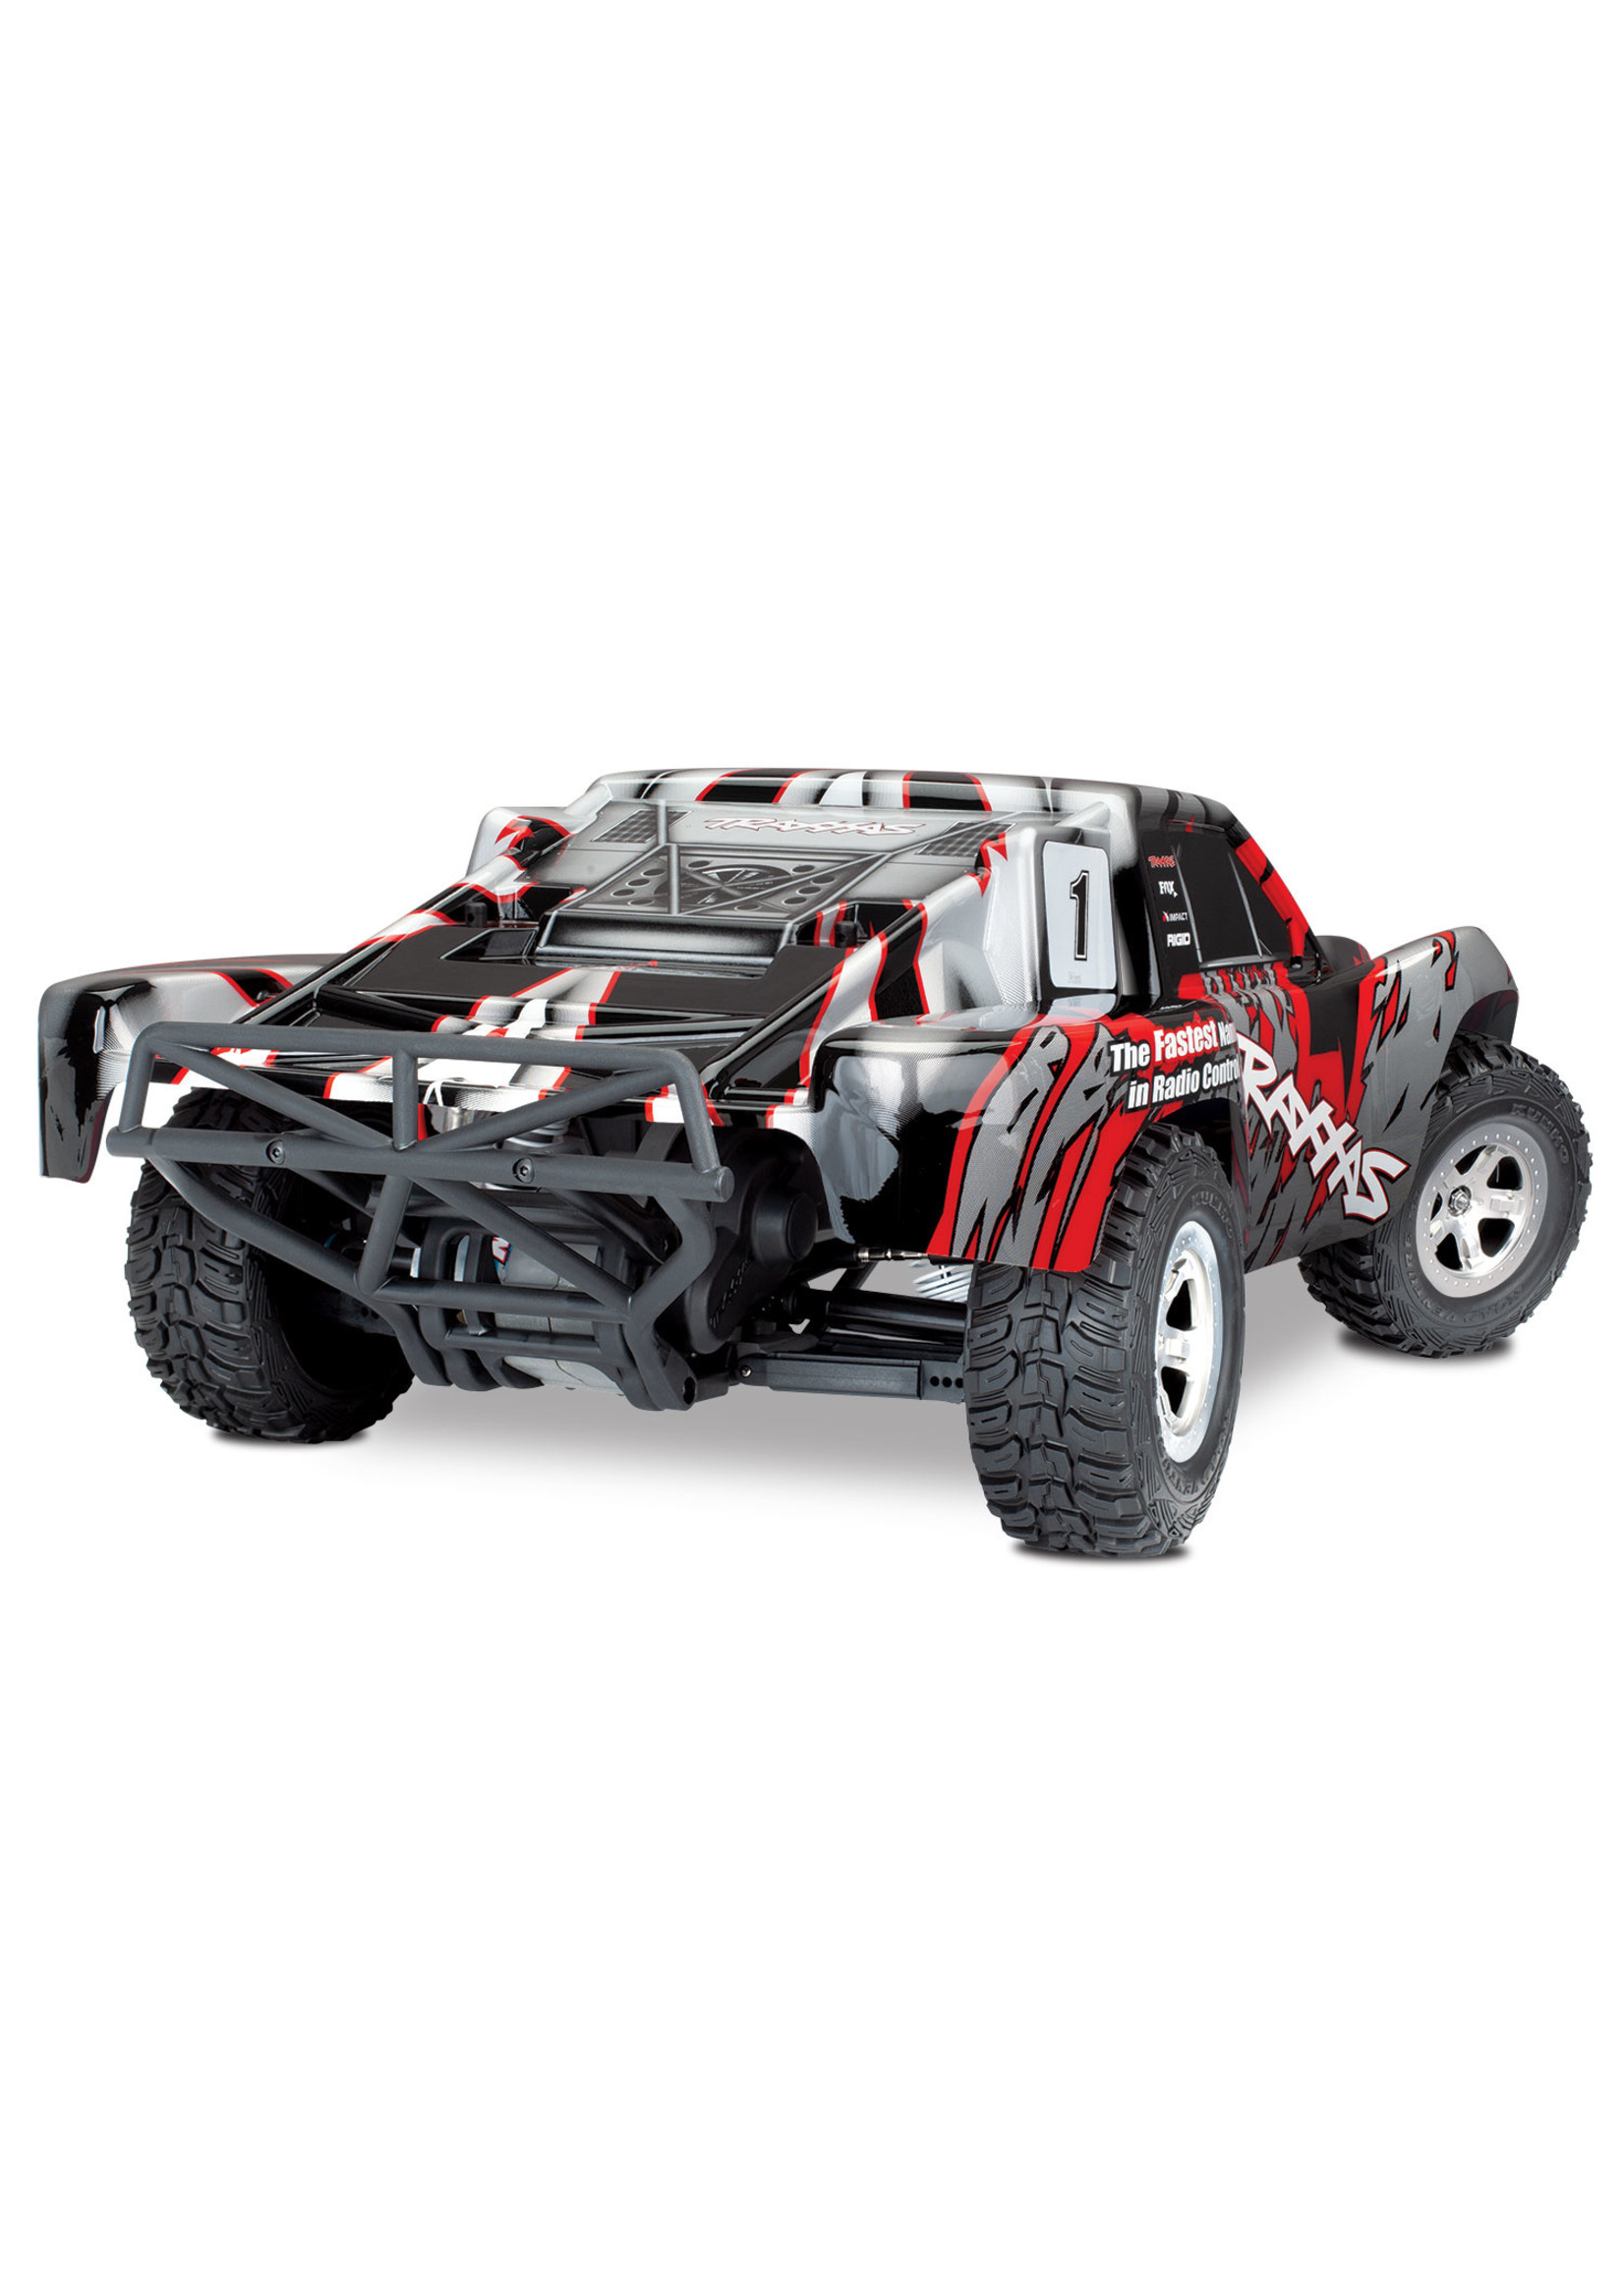 Traxxas 1/10 Slash 2WD RTR Short Course Truck - Red